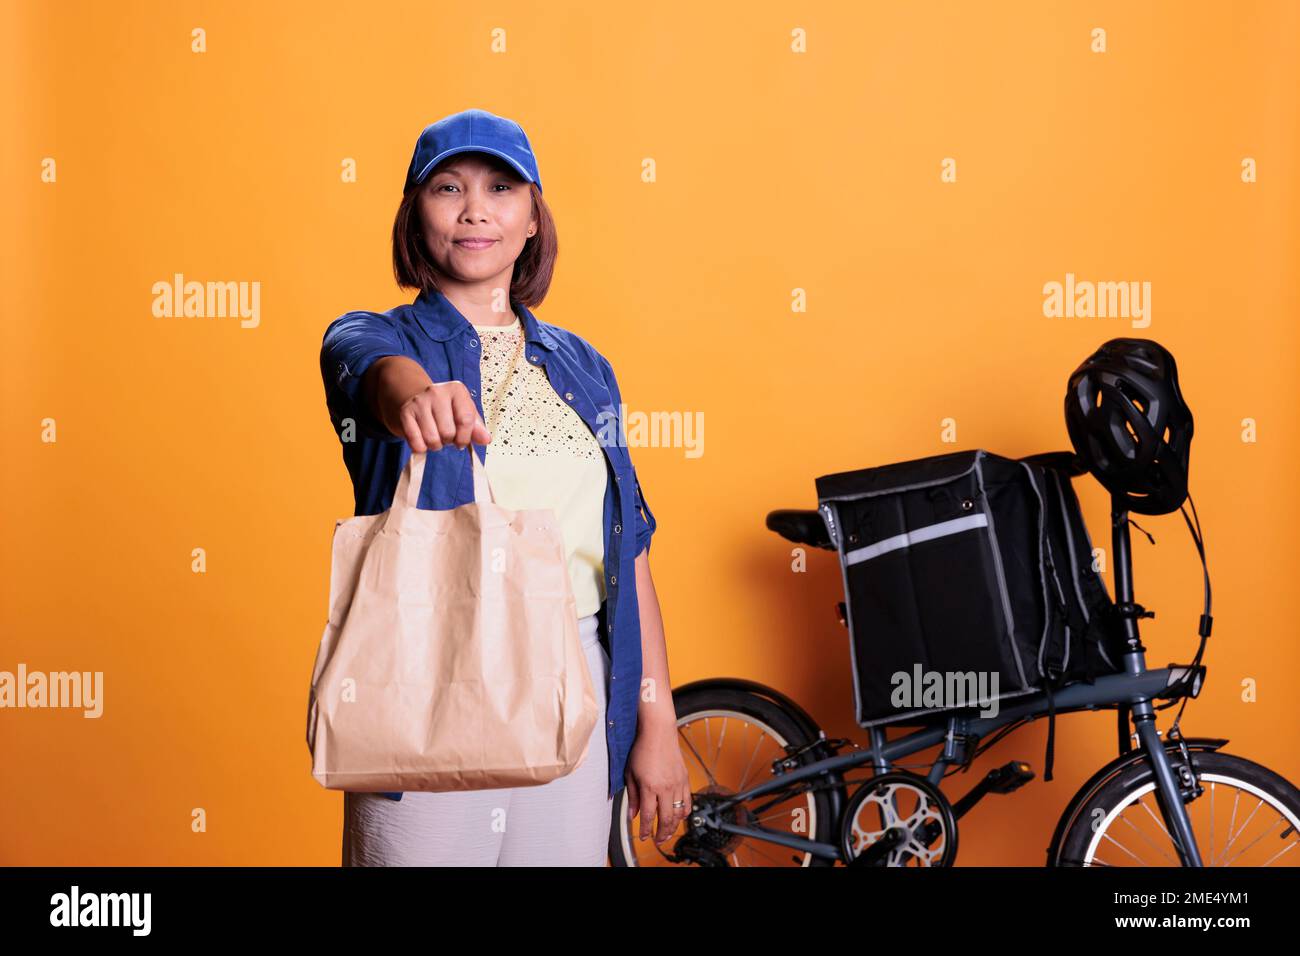 Pizzeria delivery worker wearing blue uniform while delivering fast food order to customer during lunch time. Restaurant employee standing in studio with yellow background. Takeout service concept Stock Photo